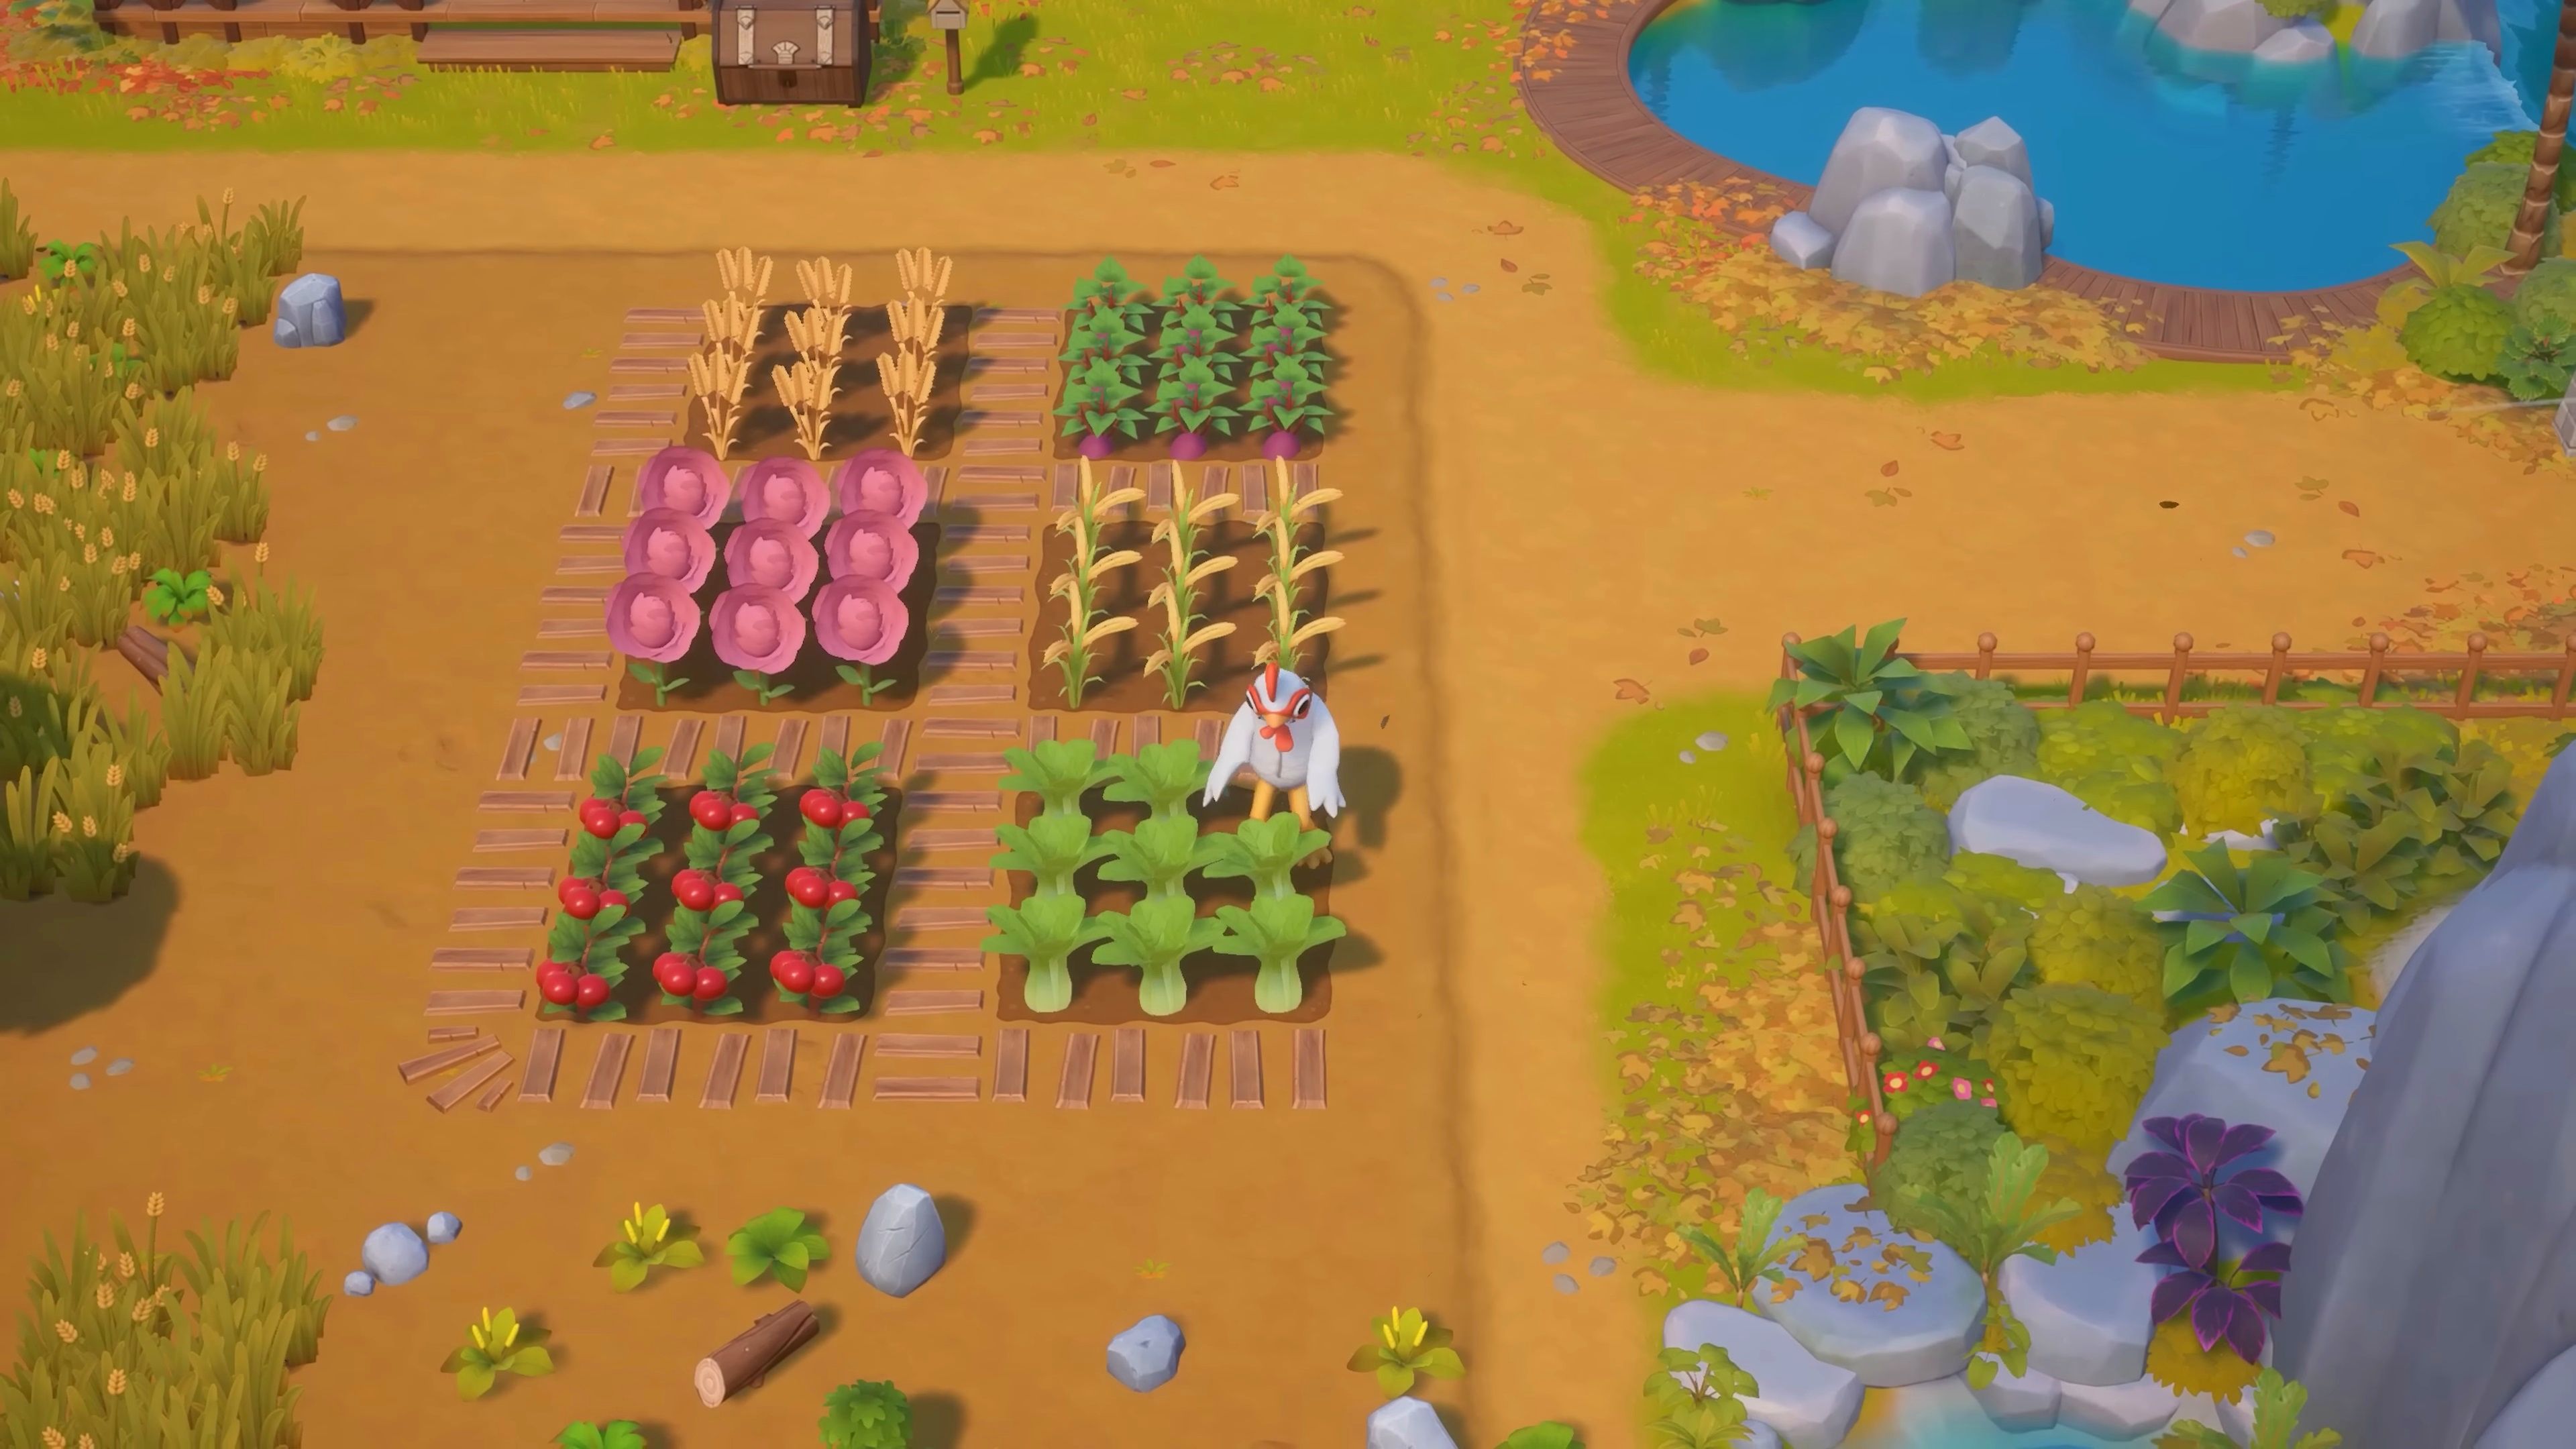 Coral Island Player In Chicken Costume Preparing To Harvest Cranberries In Fall